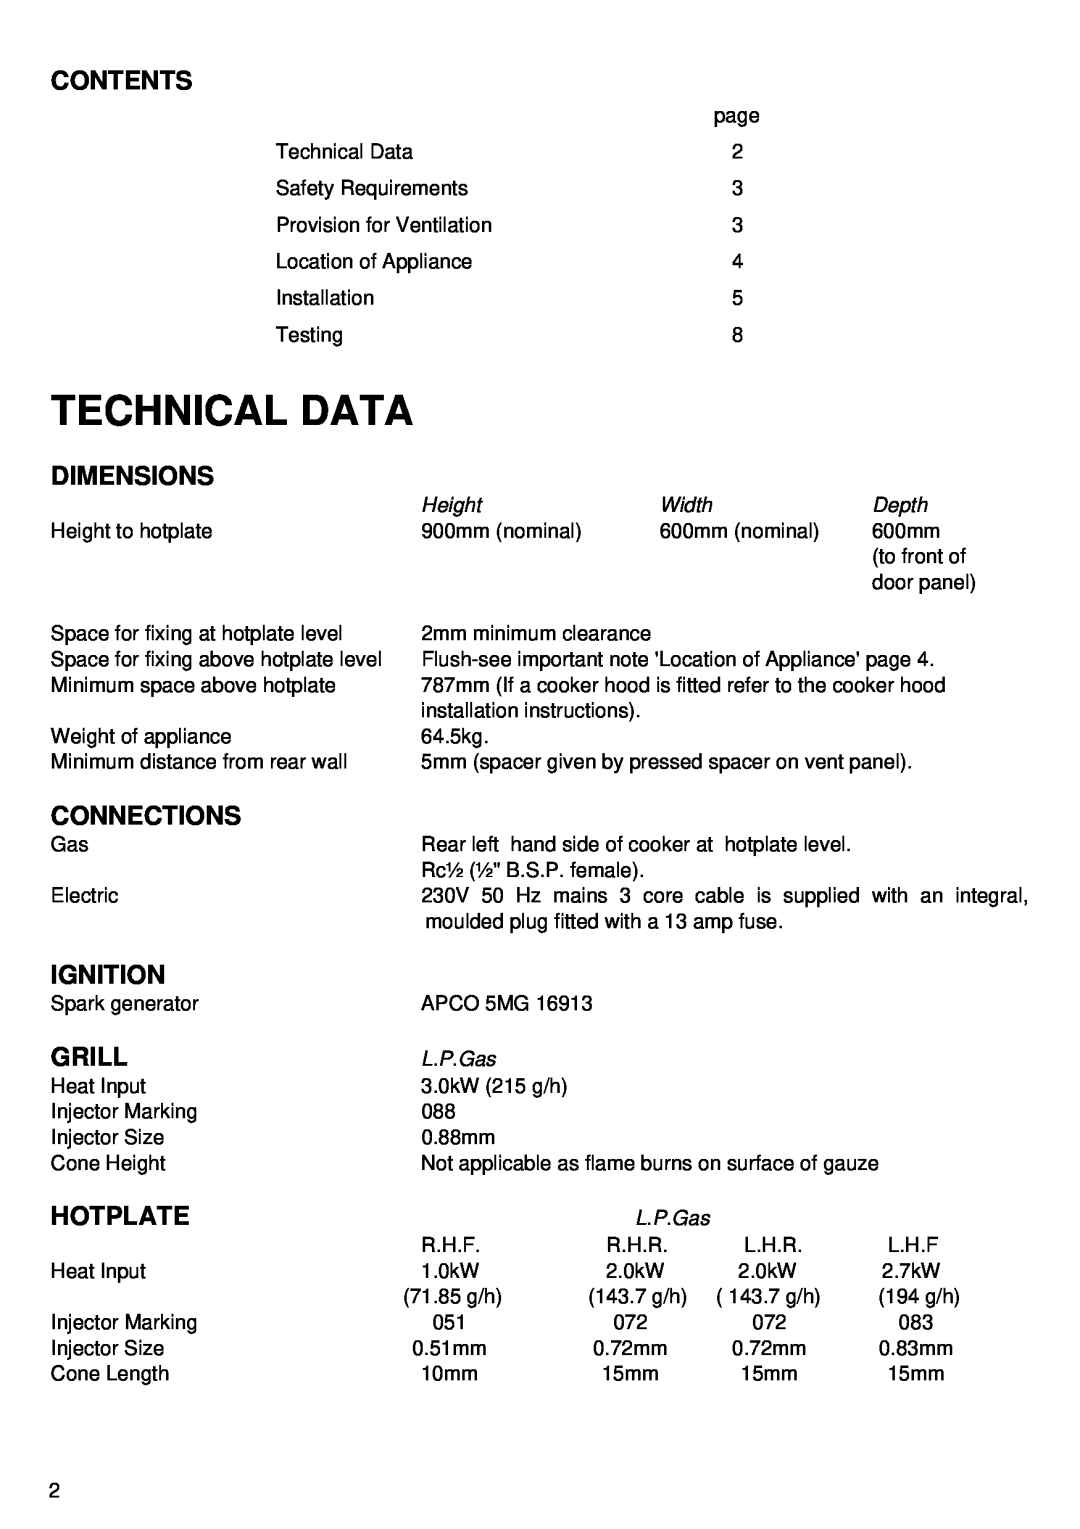 Electrolux 60 GLa manual Technical Data, Contents, Dimensions, Connections, Ignition, Grill, Hotplate 